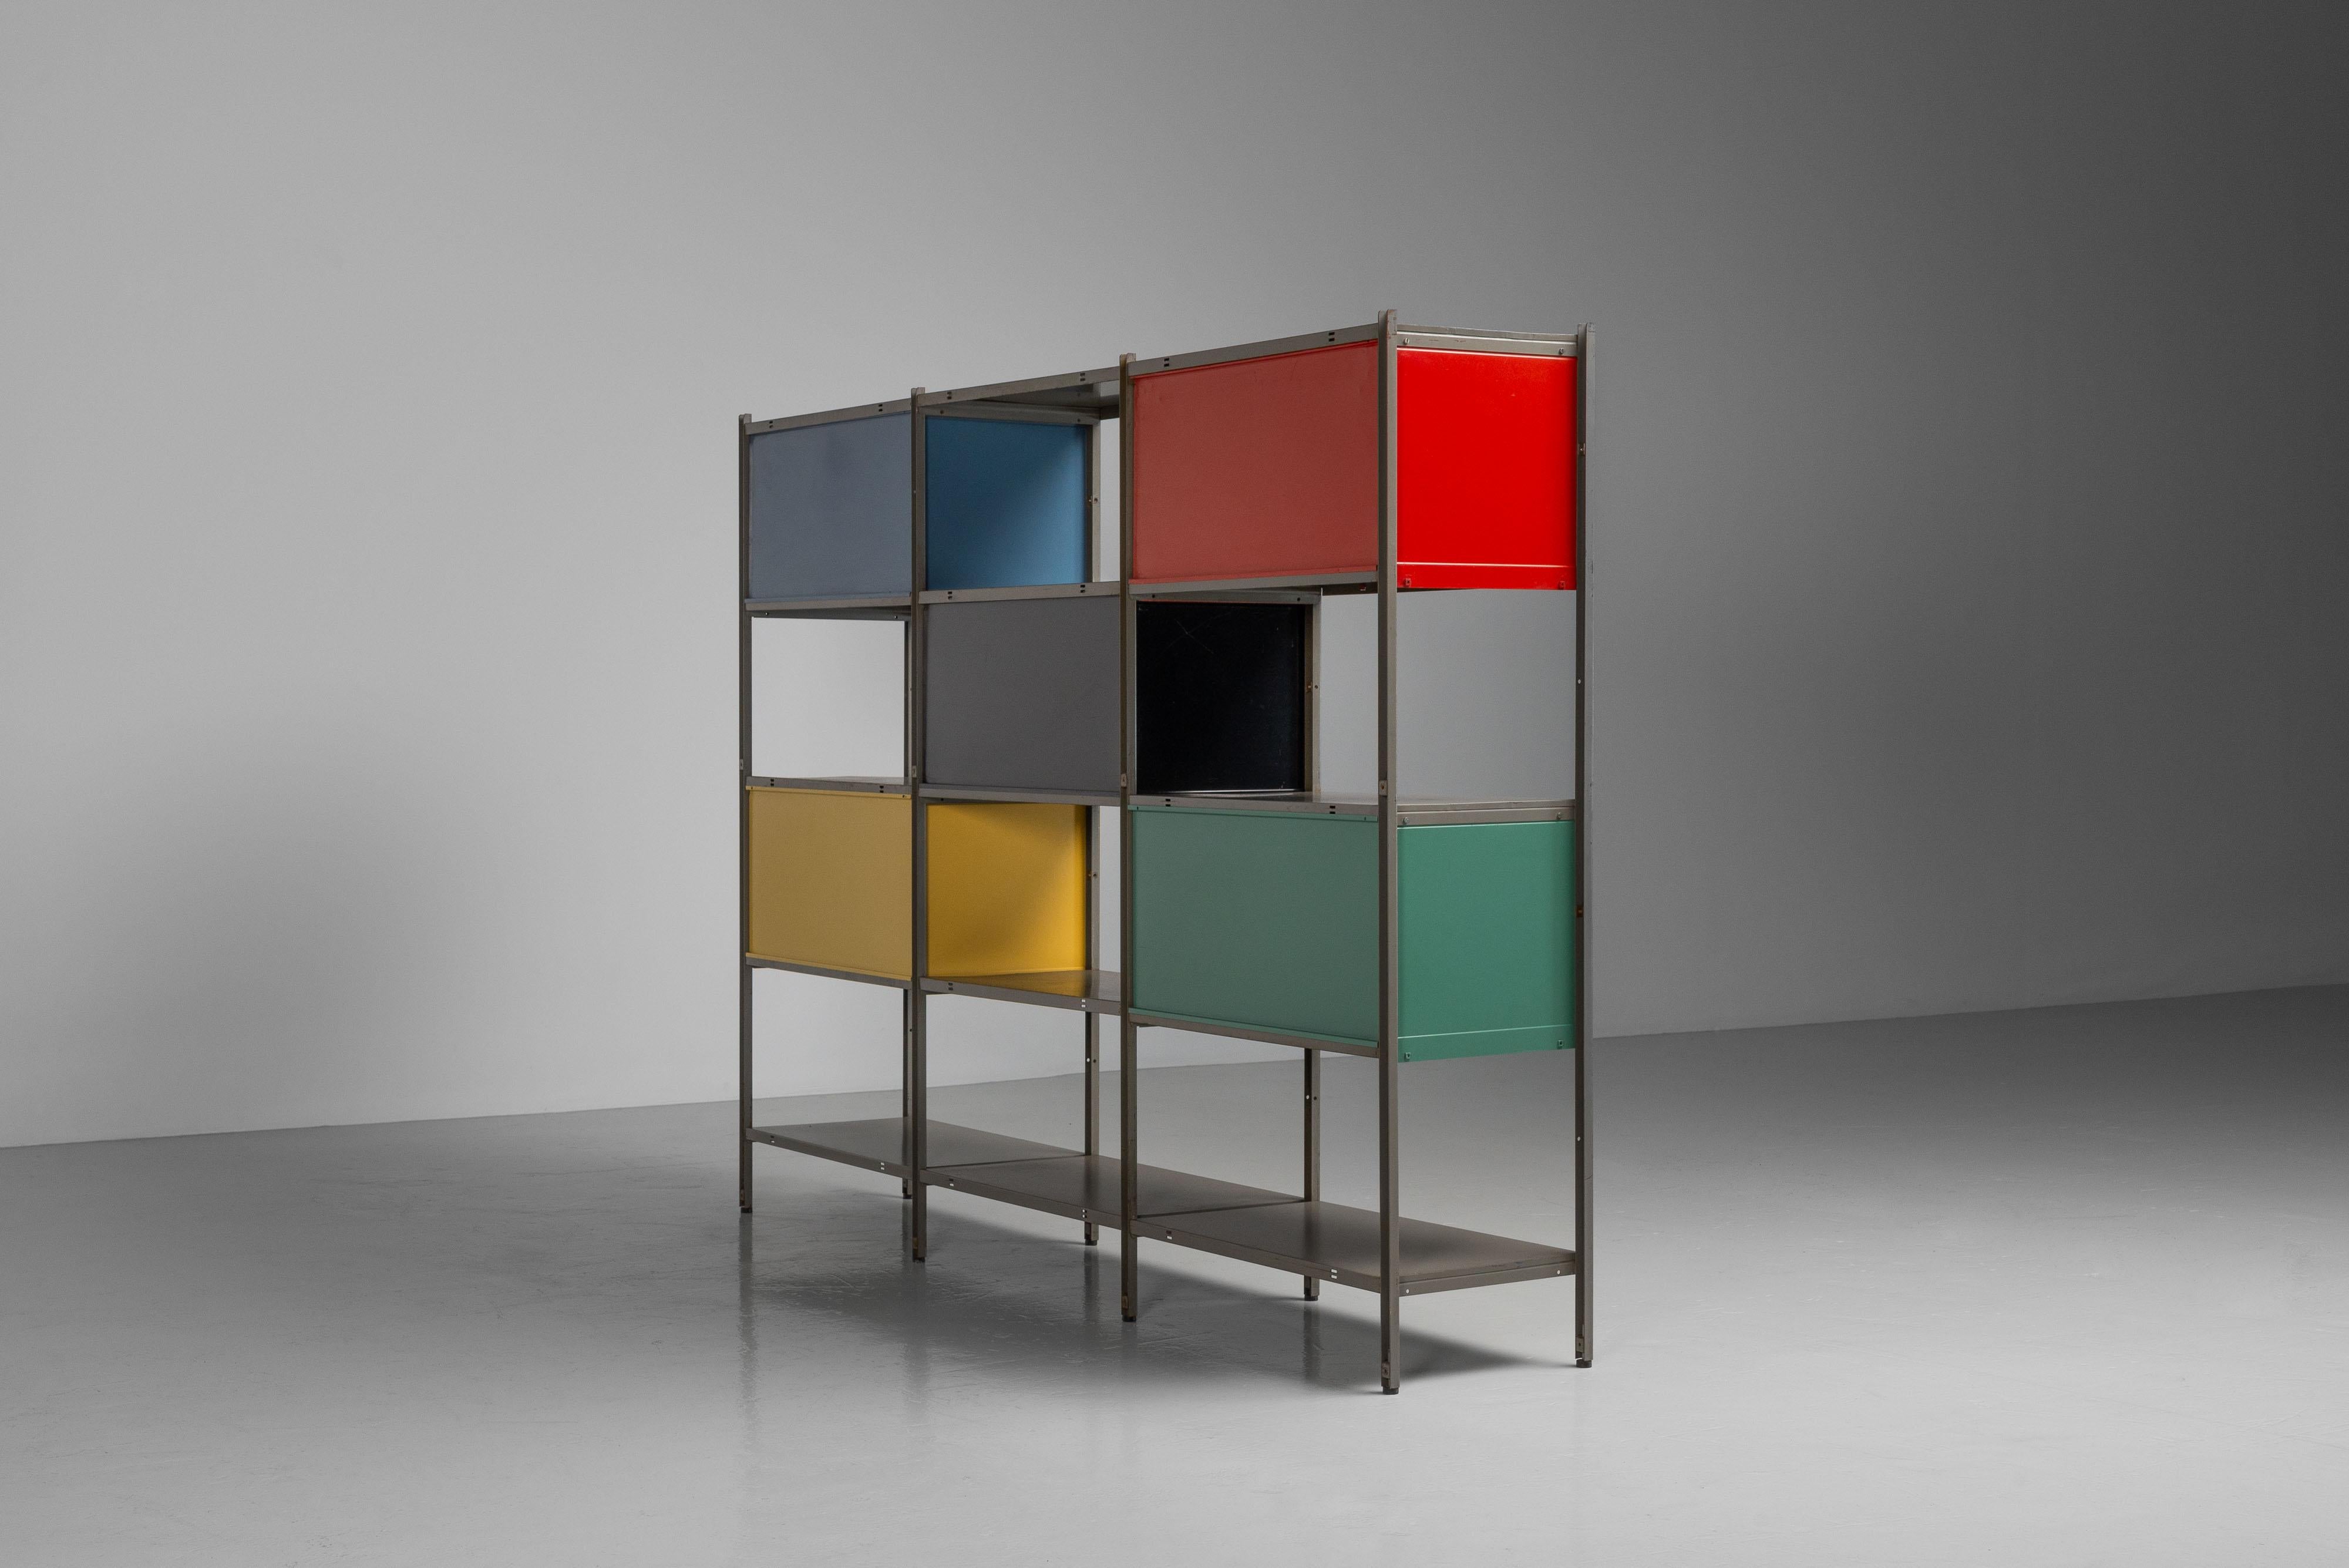 Stunning and original 663 bookcase designed by Wim Rietveld and manufactured by Gispen Culemborg in The Netherlands in 1954. Modular wall rack made of gray painted sheet steel. The customer was able to put together a wall unit himself using a number